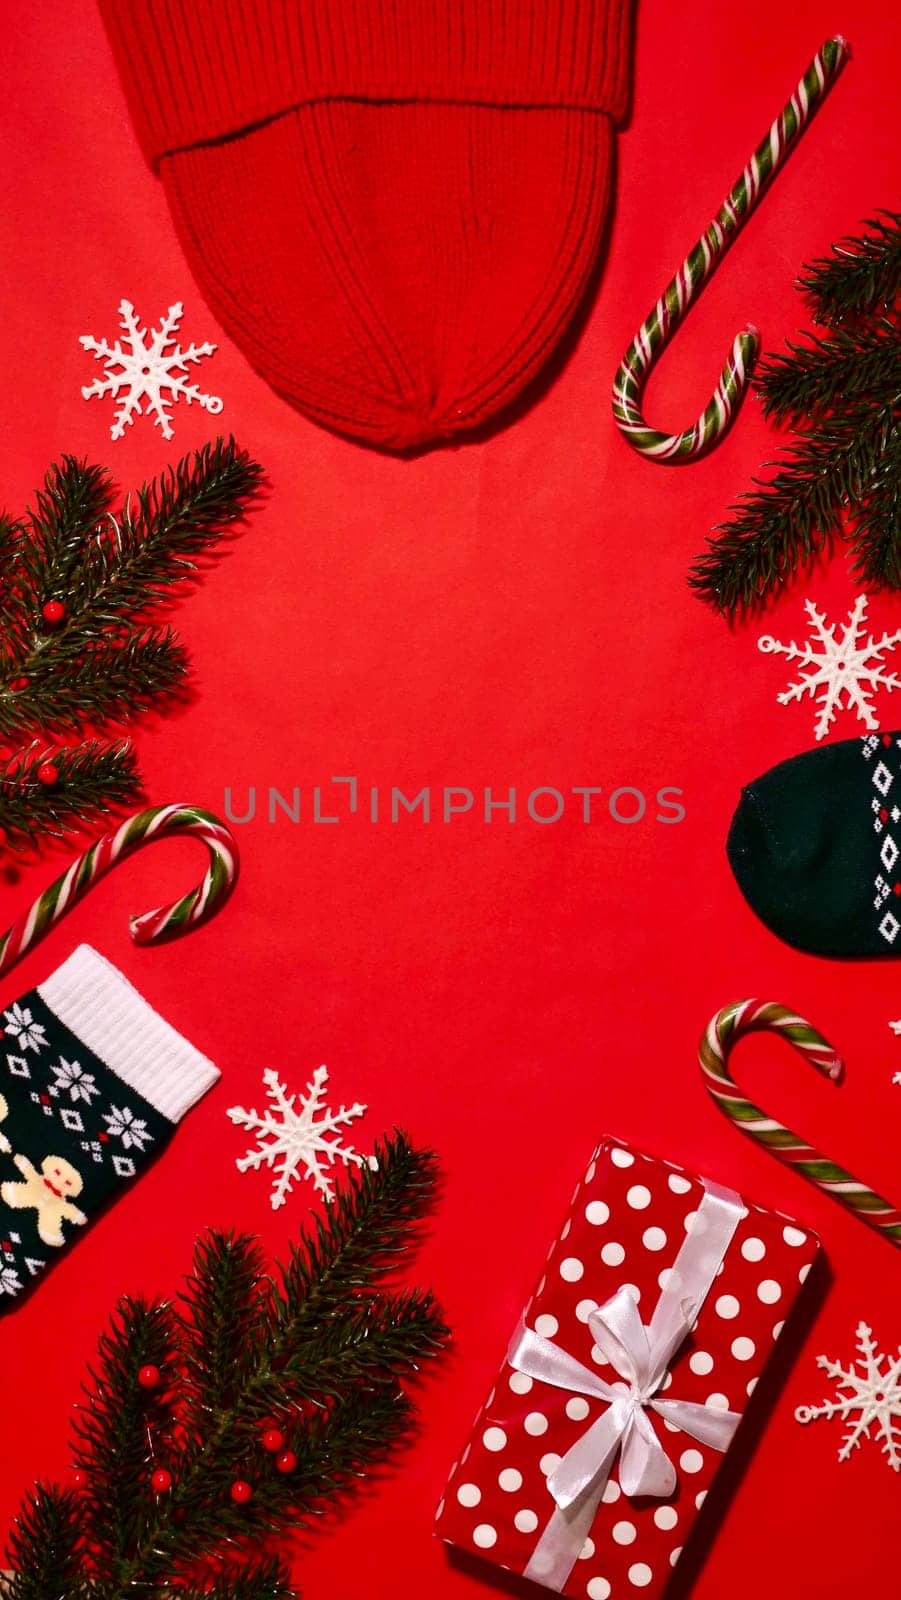 Festive Christmas Frame on Red Background on New Year 2024 with Branch, Gift, Hat, Candy Caramel, Snowflakes, Socks. Top view, close-up, flatlay, copy space, composition, vertical